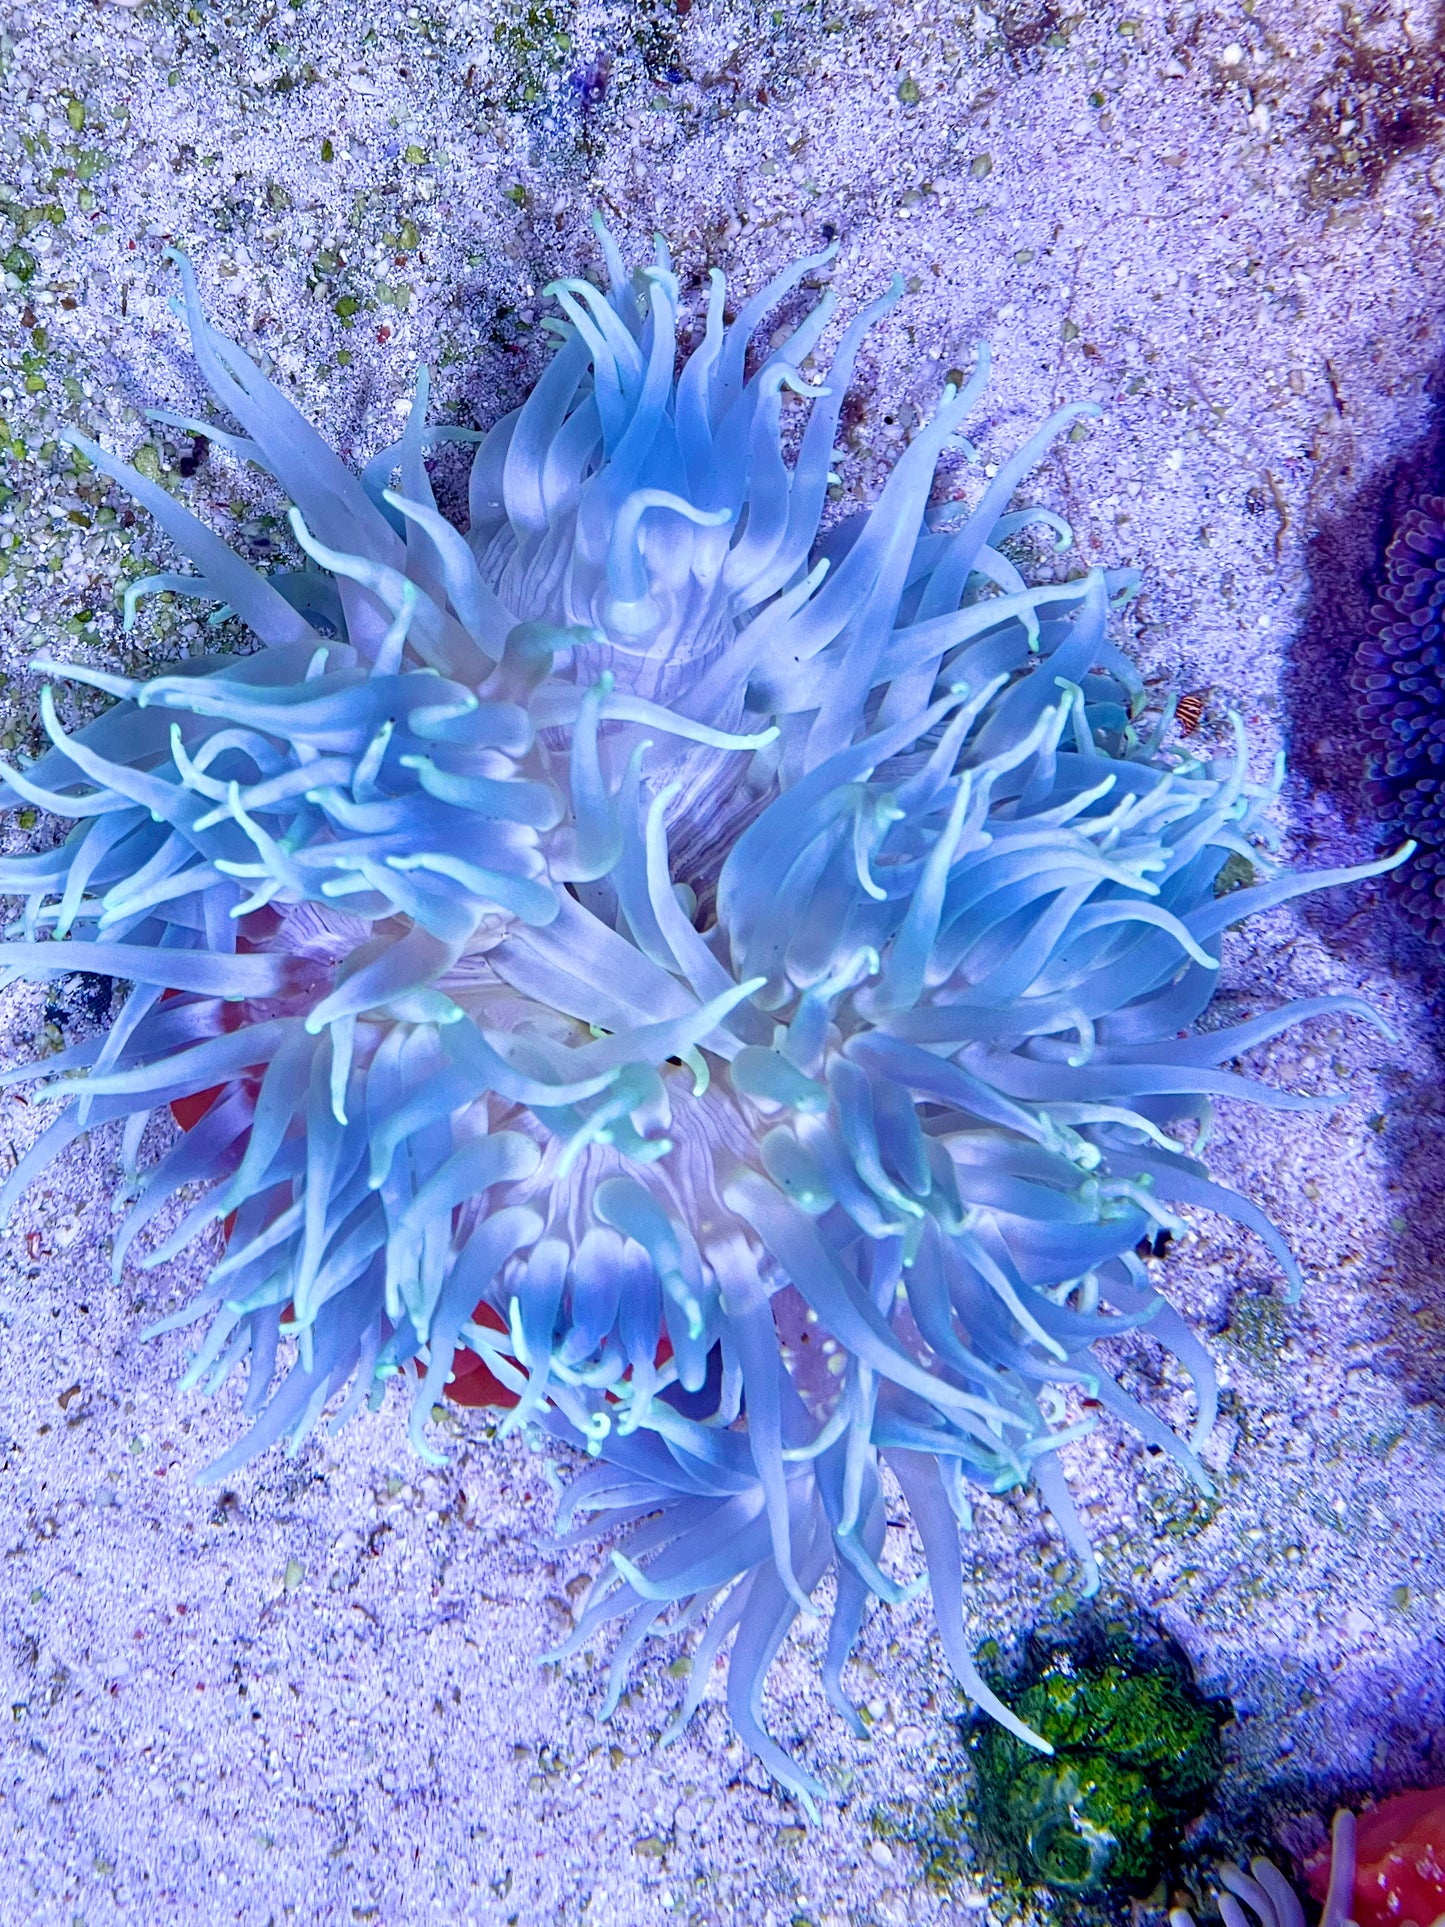 Long Tentacle Anemone Size S: 2" to 3"